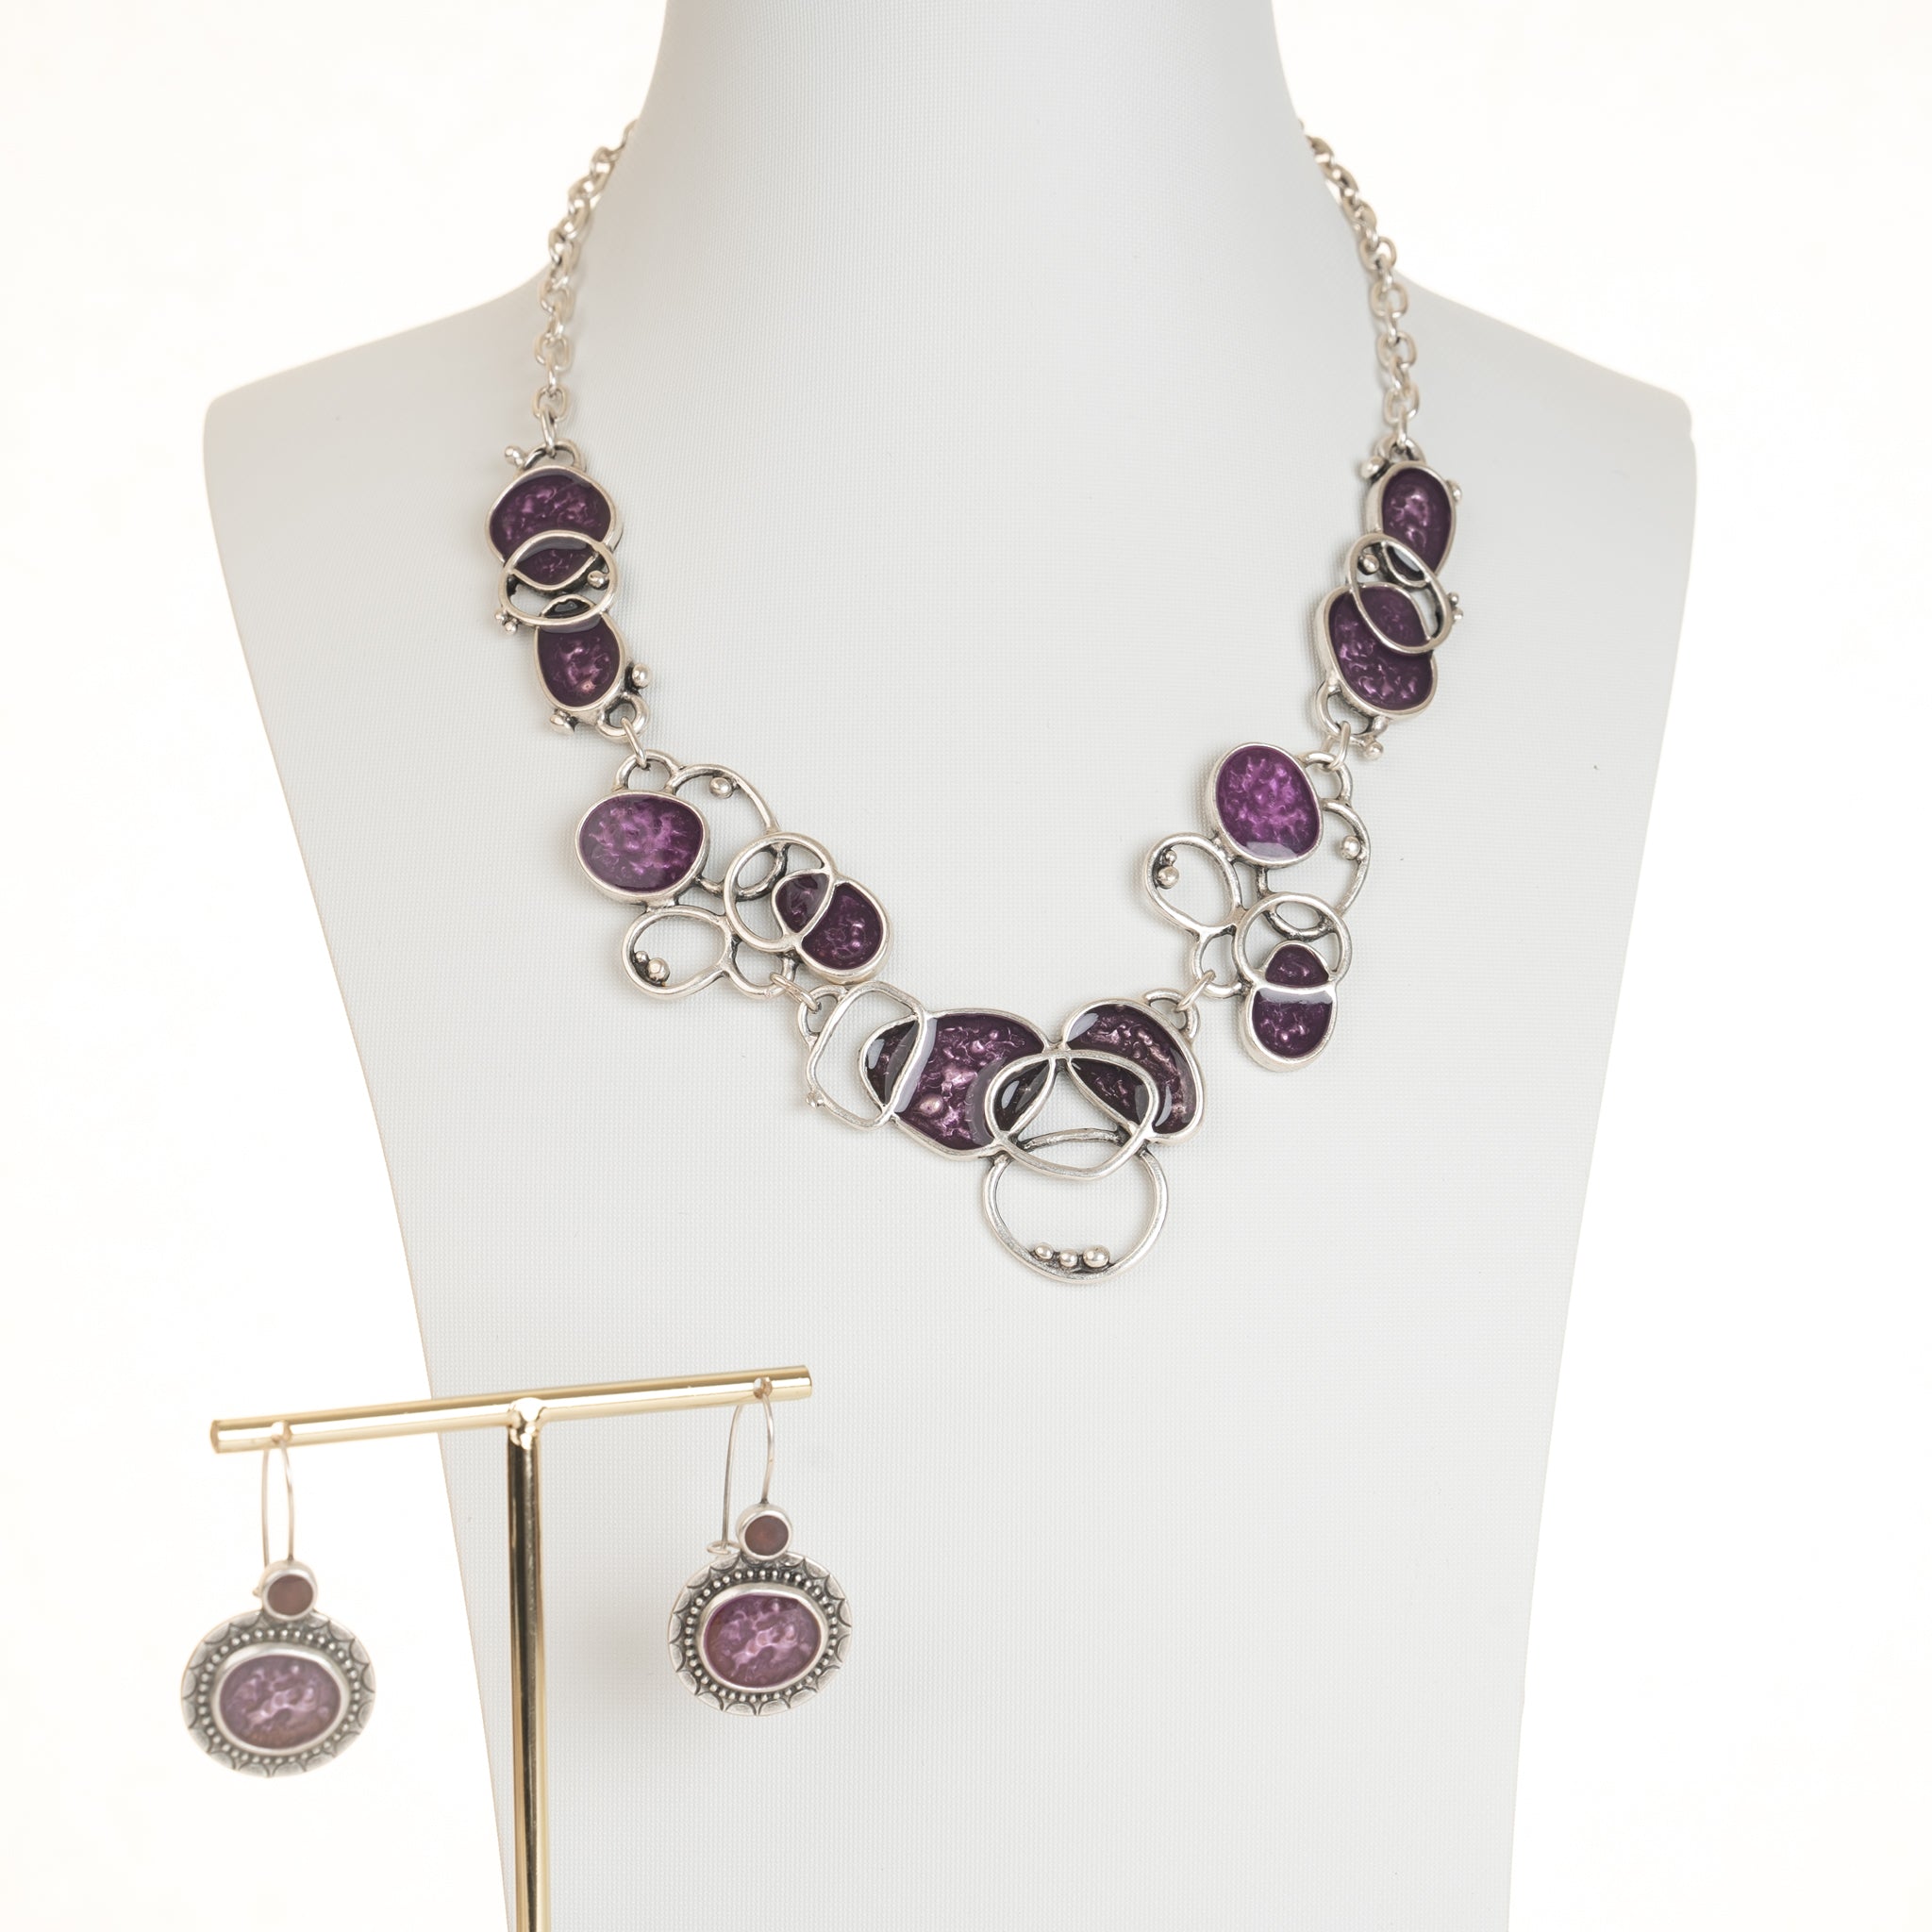 Euphoria Purple Necklace and Earrings Set - Cherry Blossom